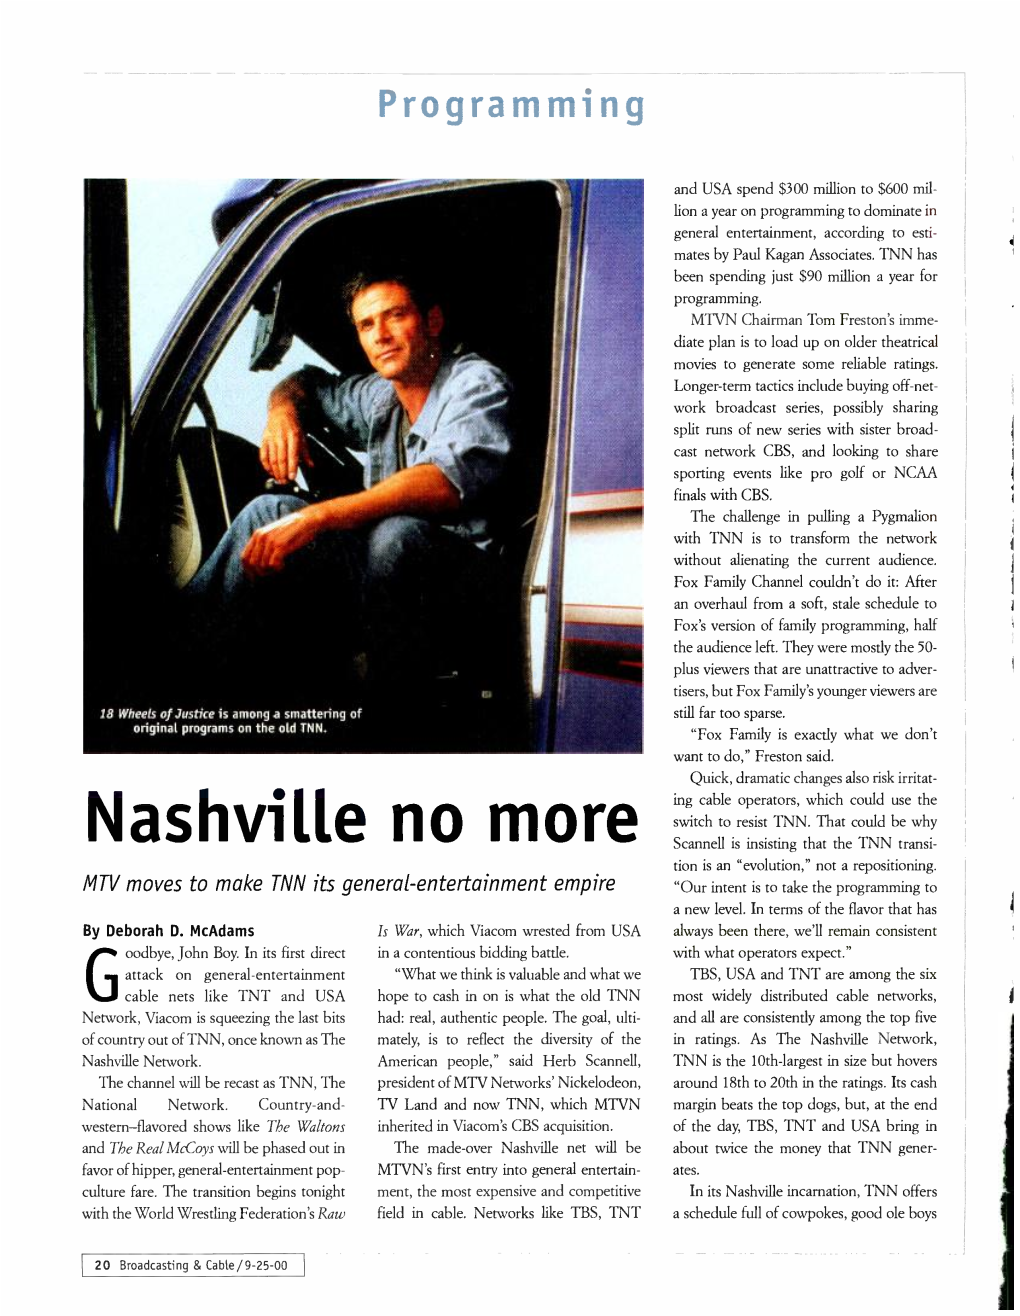 Nashville No More Scannell Is Insisting That the TNN Transi- Tion Is an "Evolution," Not a Repositioning